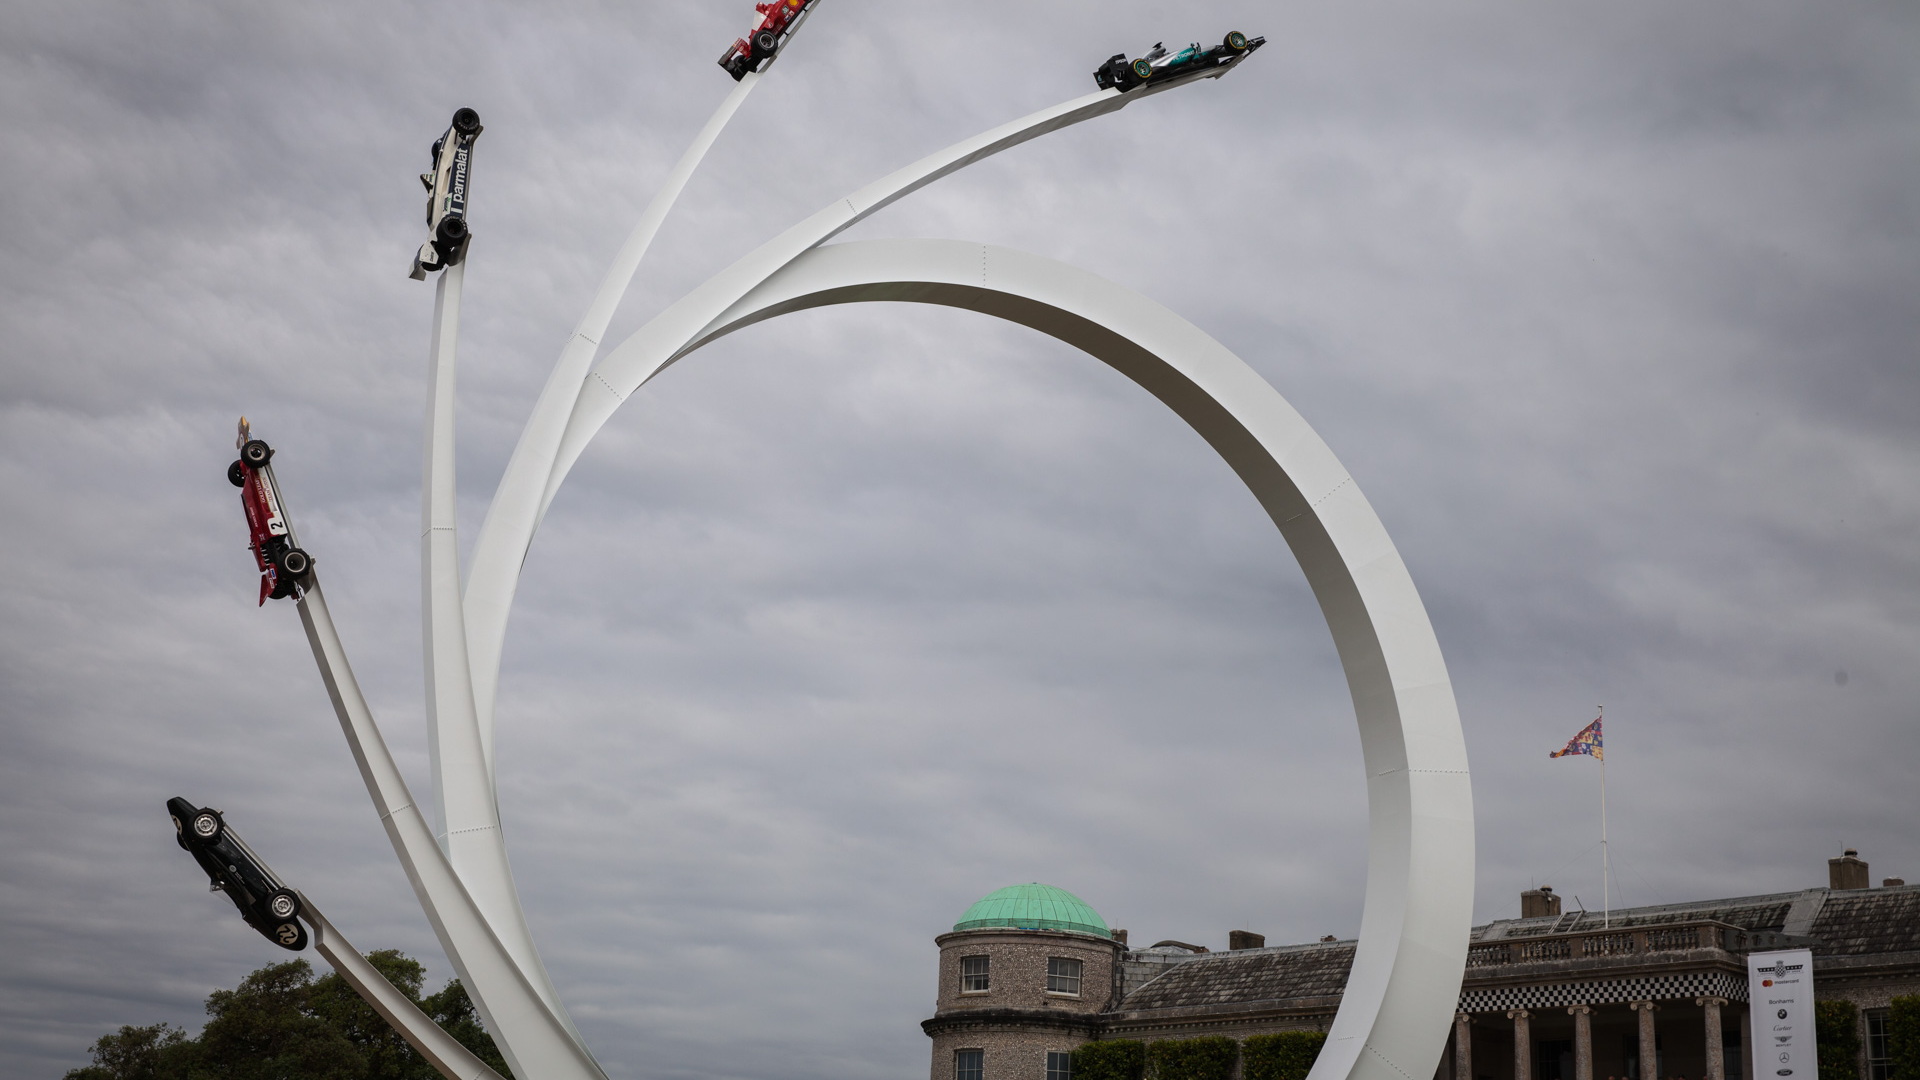 2017 Goodwood Festival of Speed-Day 3